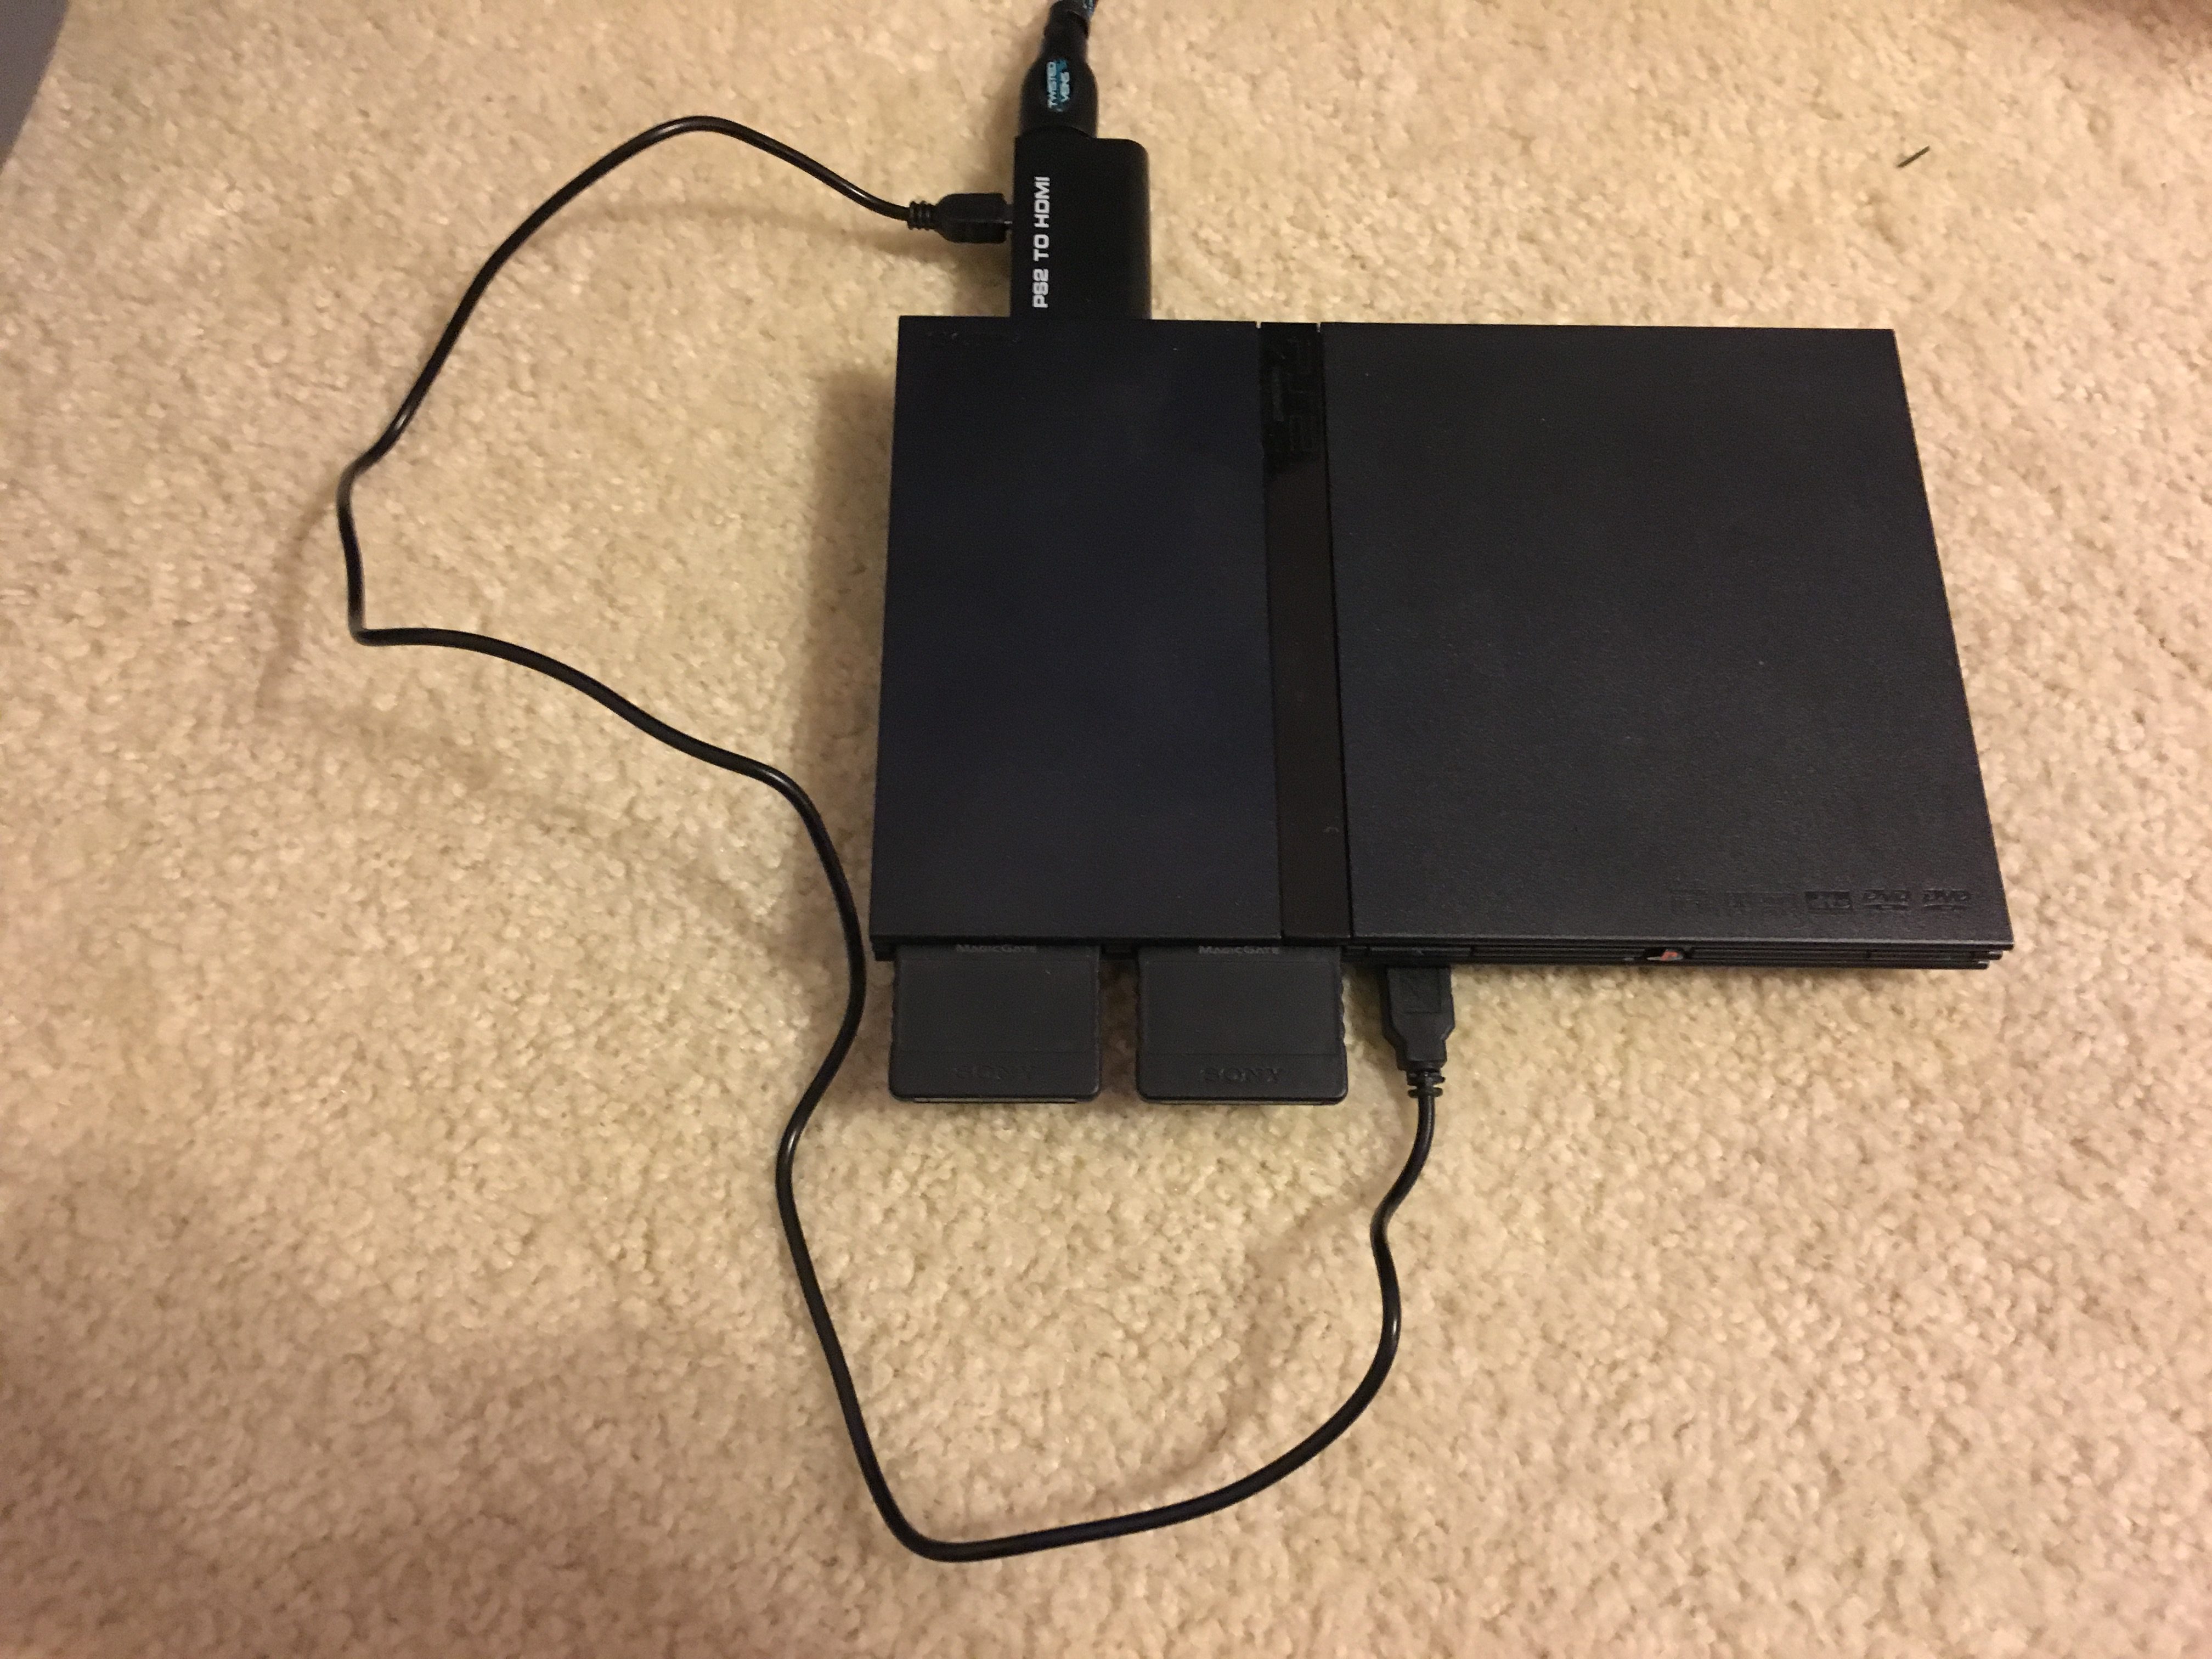 connect playstation 2 to hdmi tv